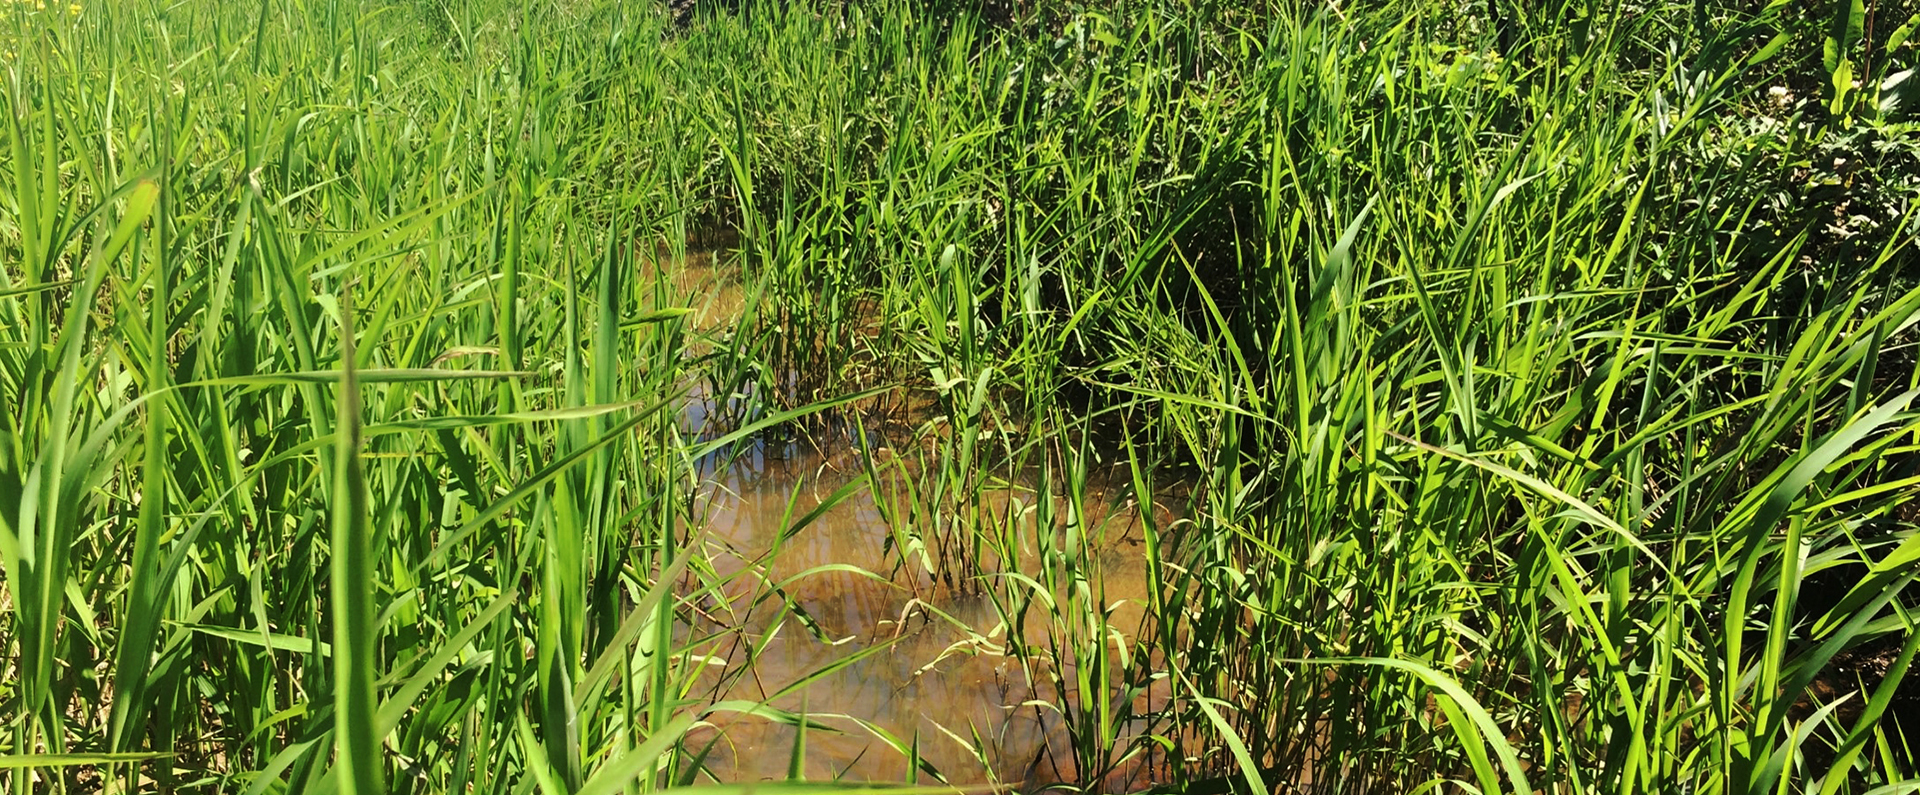 Aquatic grass growing in a drainage ditch